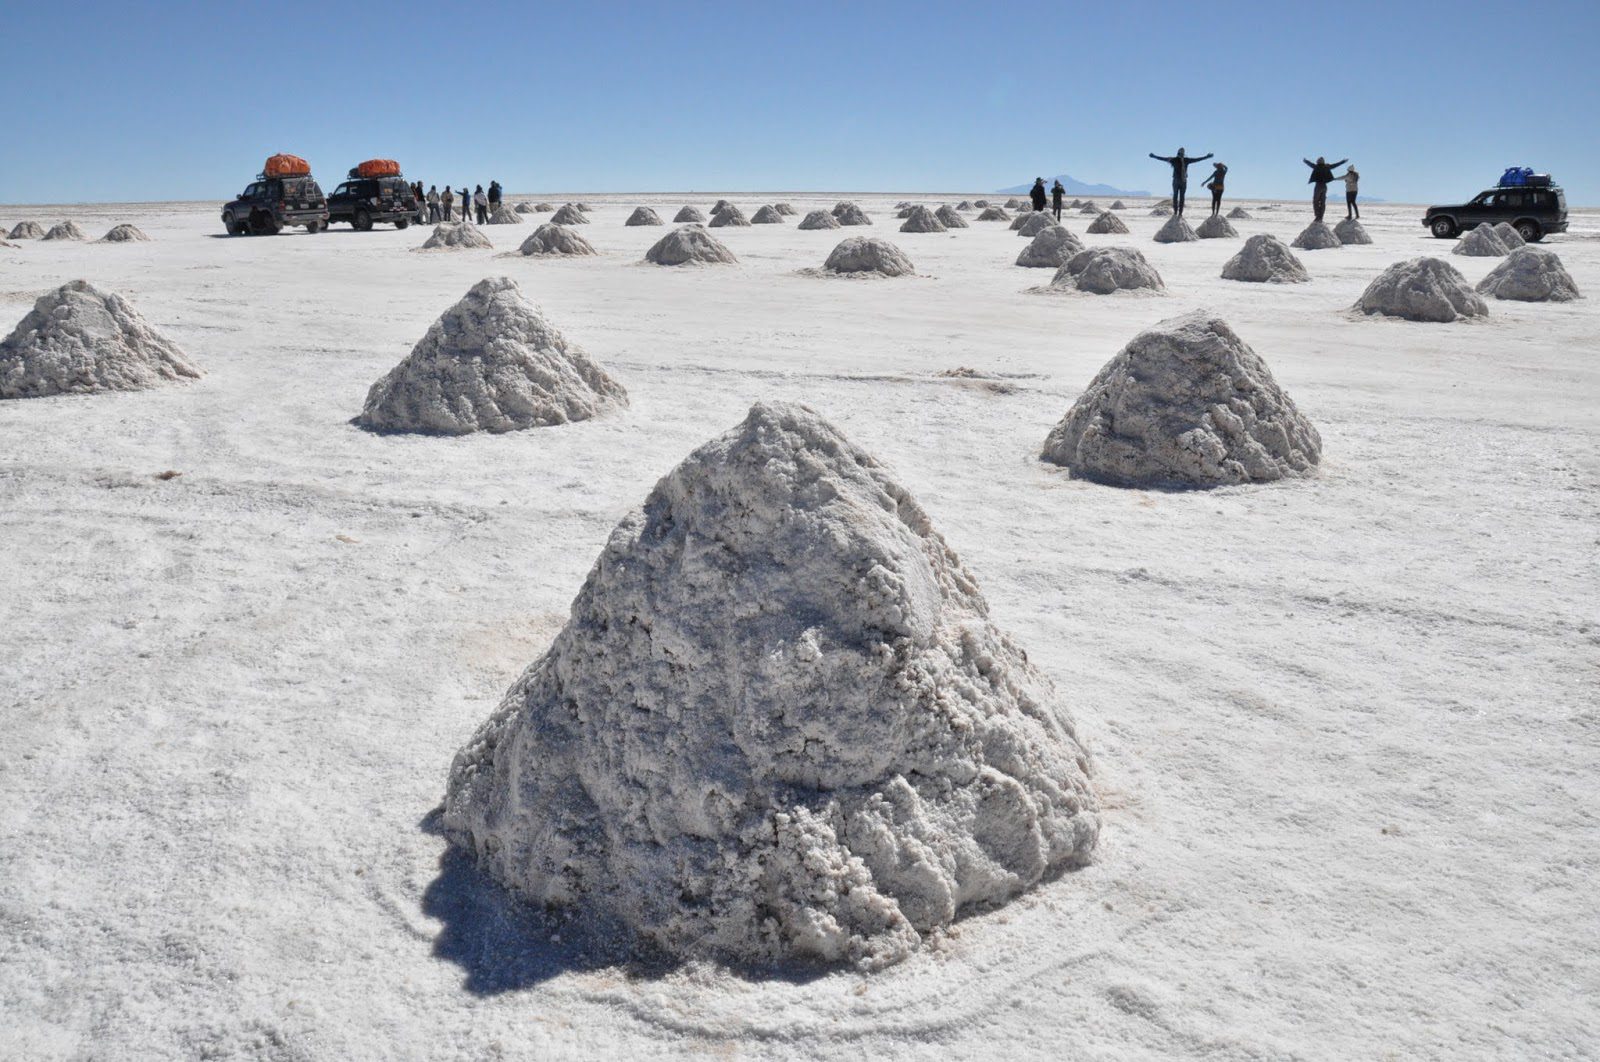 These mounds of salt are a result of the mining process.